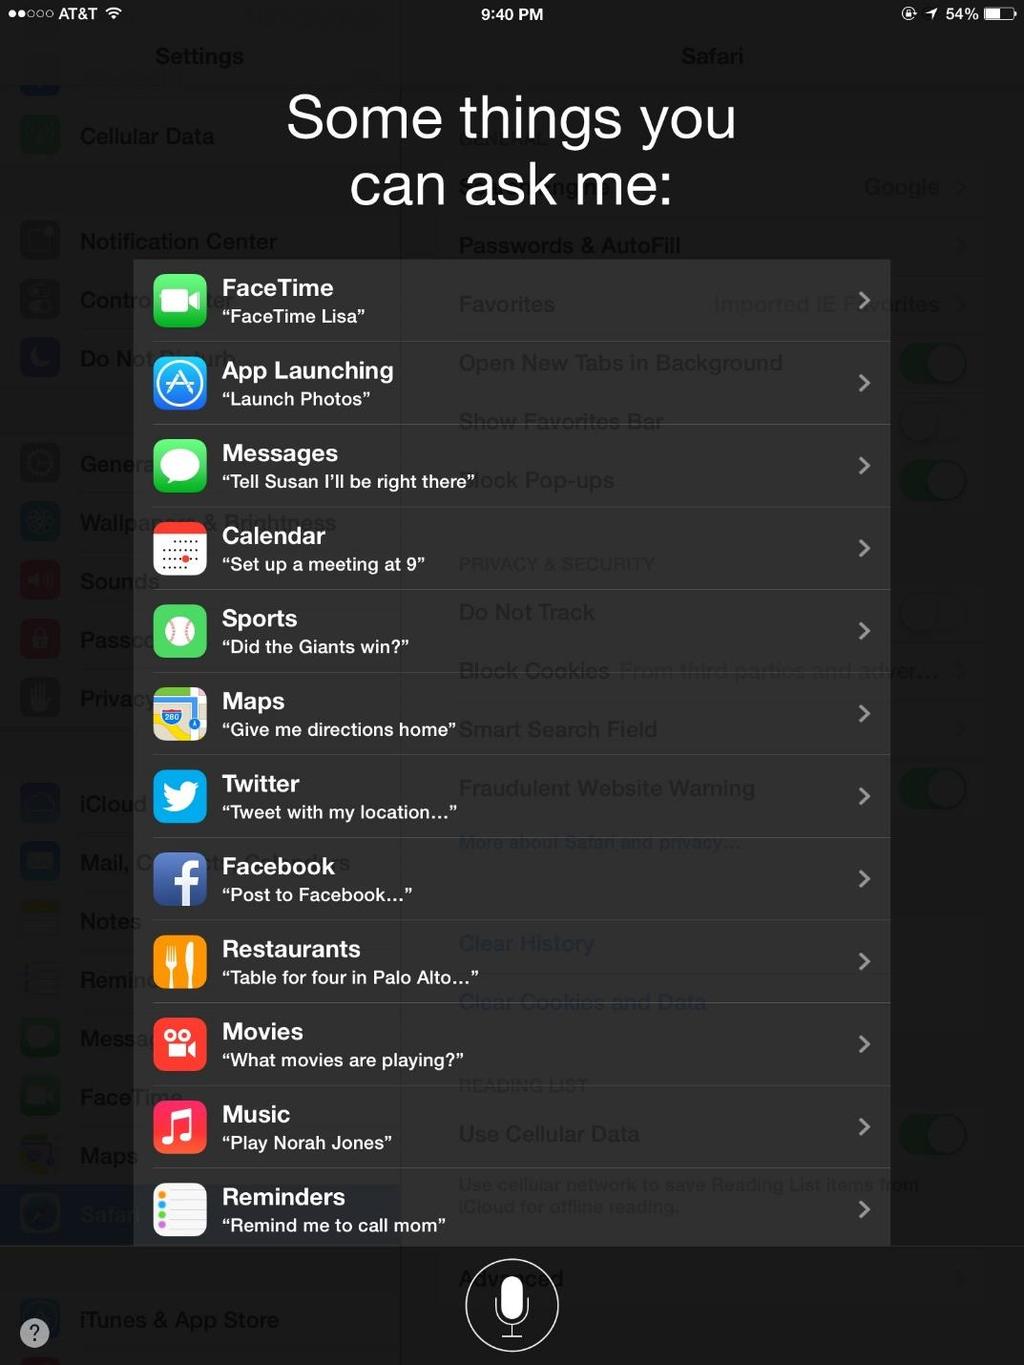 Ask Siri if you want to know anything! Want to know what Siri can do? Just ask her!